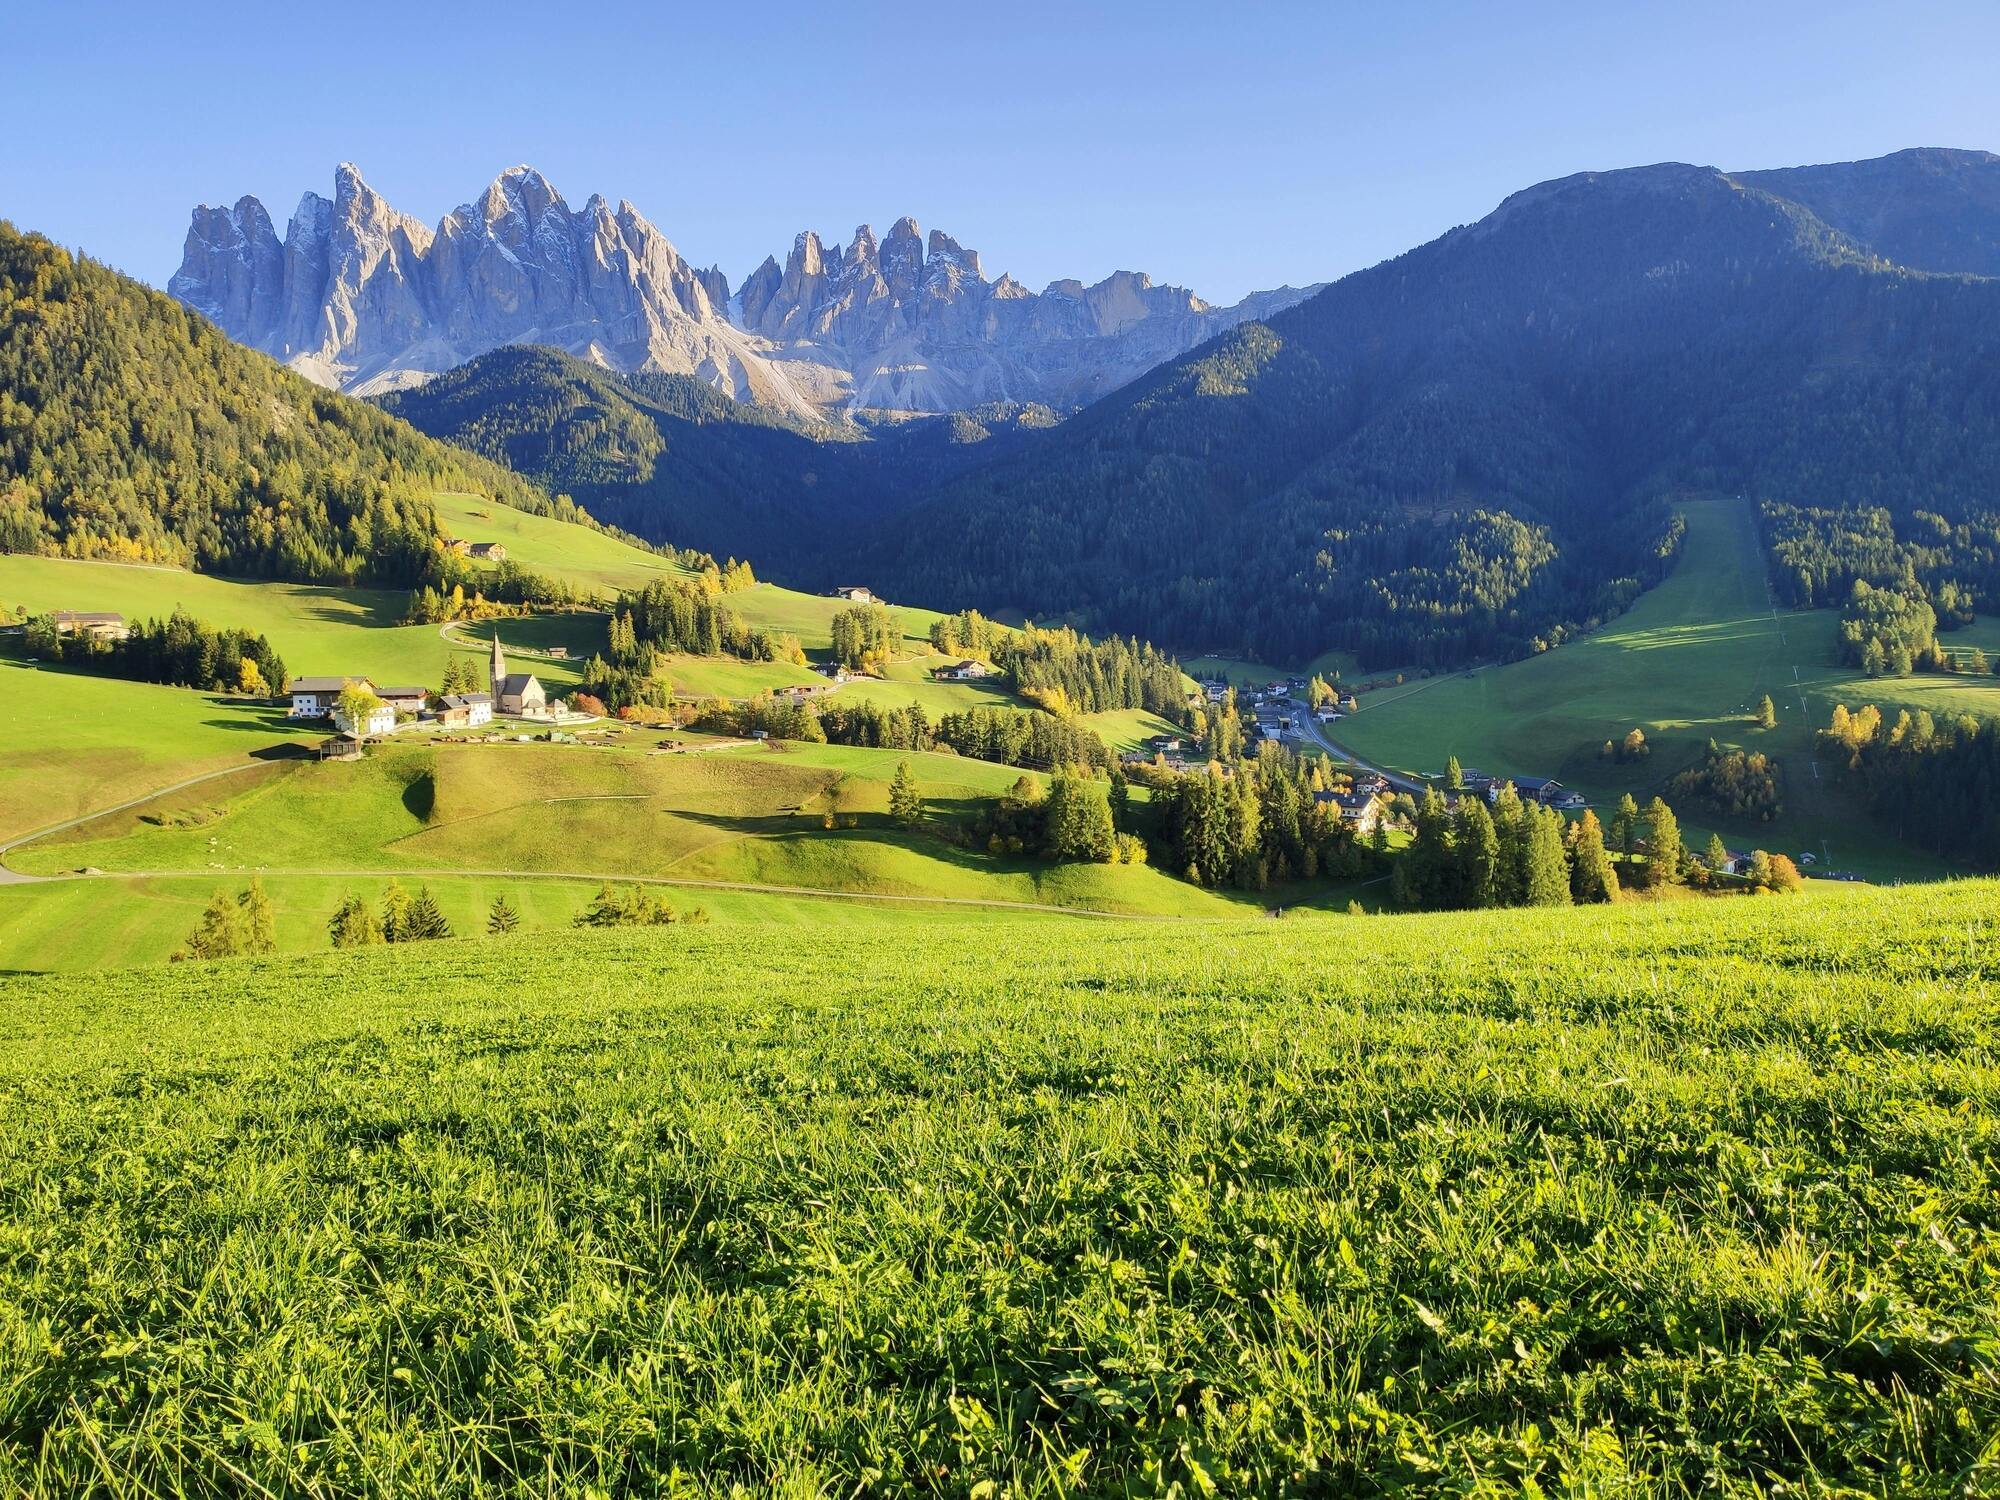 Dolomite Alps: Top 8 hotels with a focus on wellness and spiritual revitalization for guests